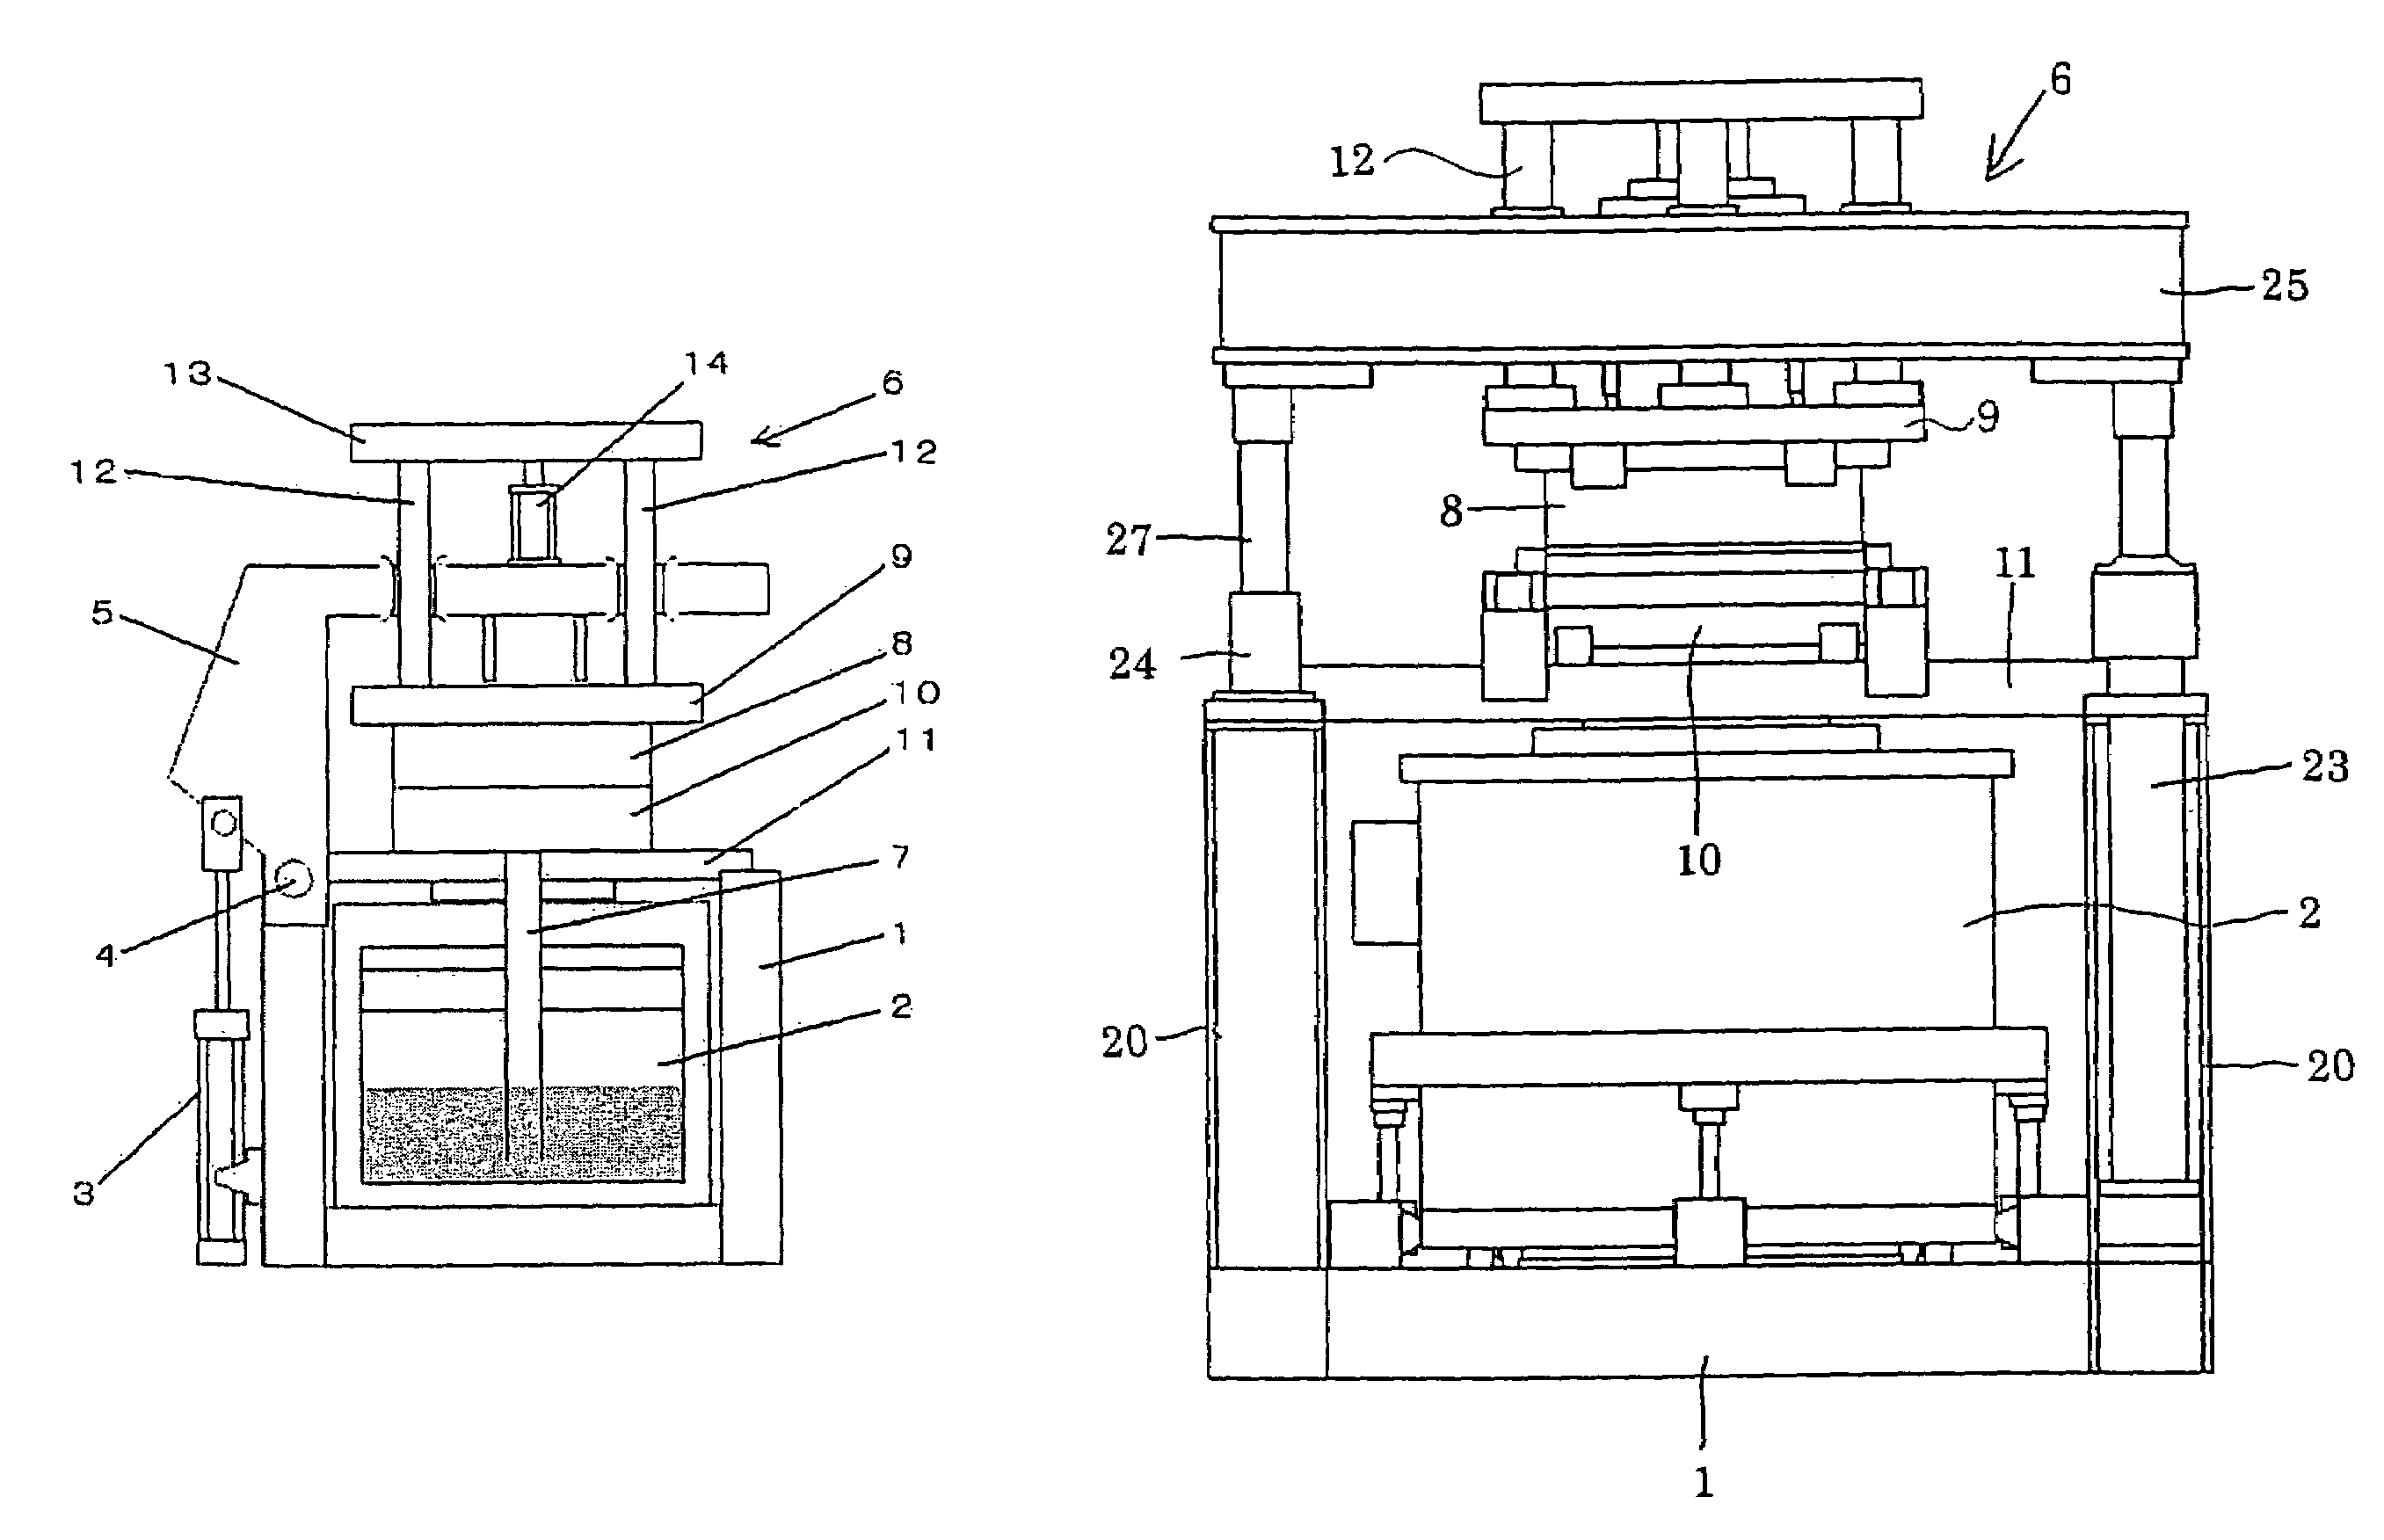 Metal mold casting device using metal cope and metal drag and device for moving metal cope relative to metal drag